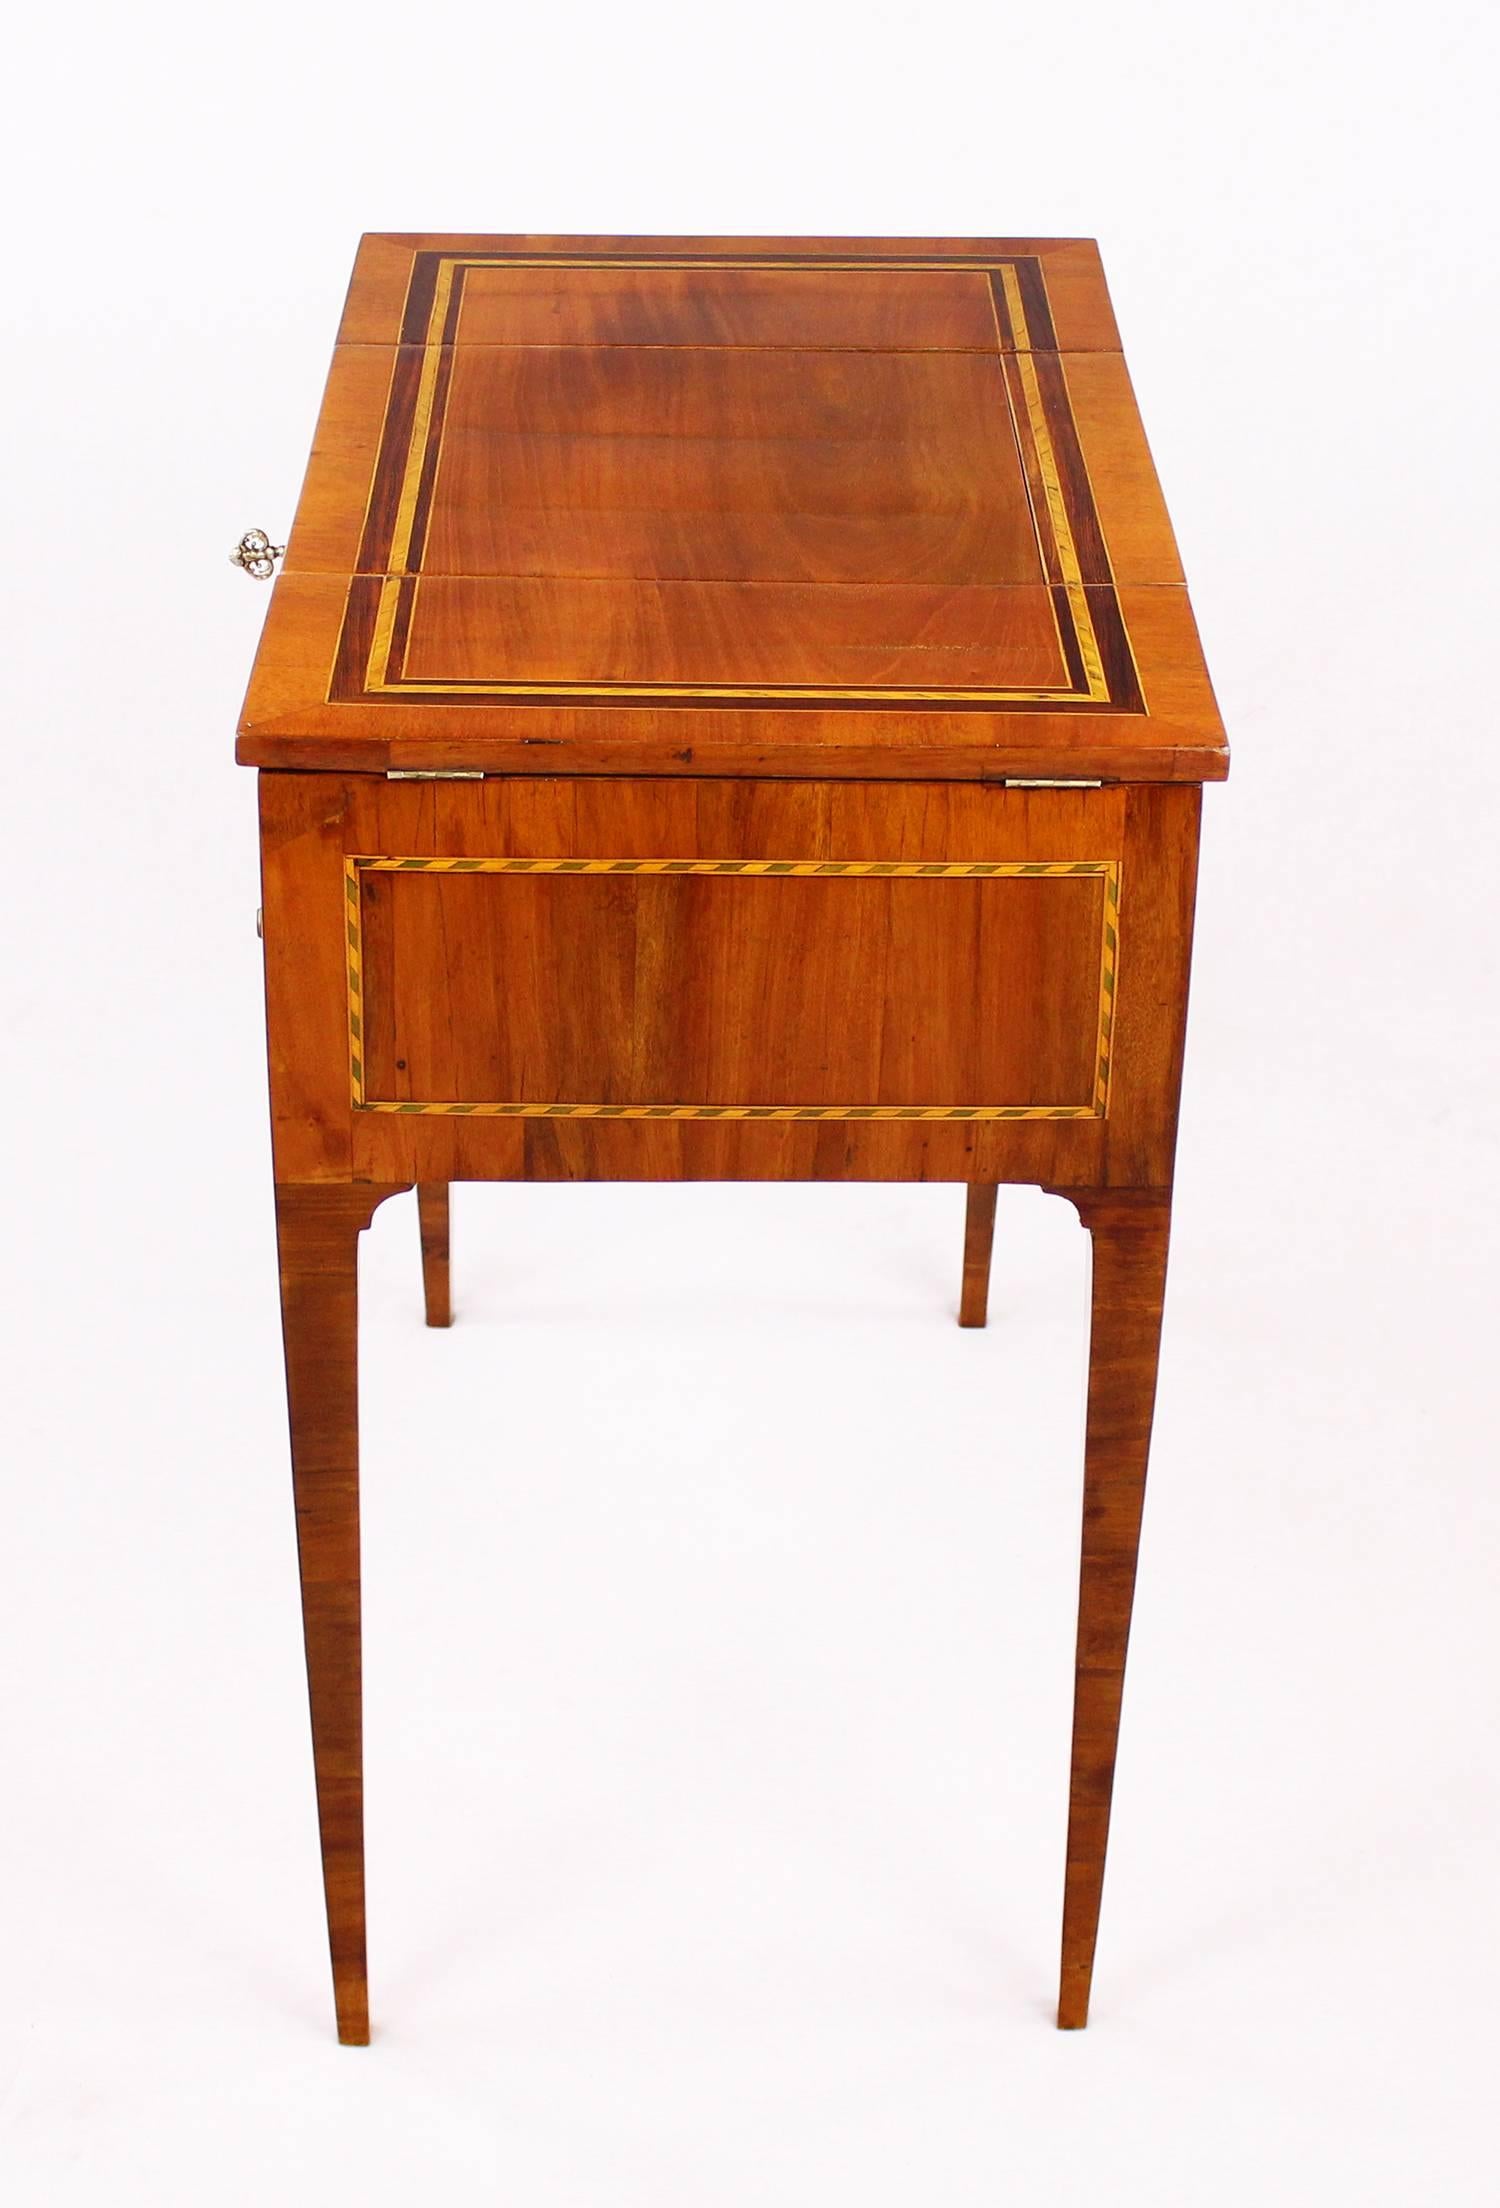 Early 19th Century Dressing Table, Poudreuse, Mahogany Veneered, Marquetry Works 2